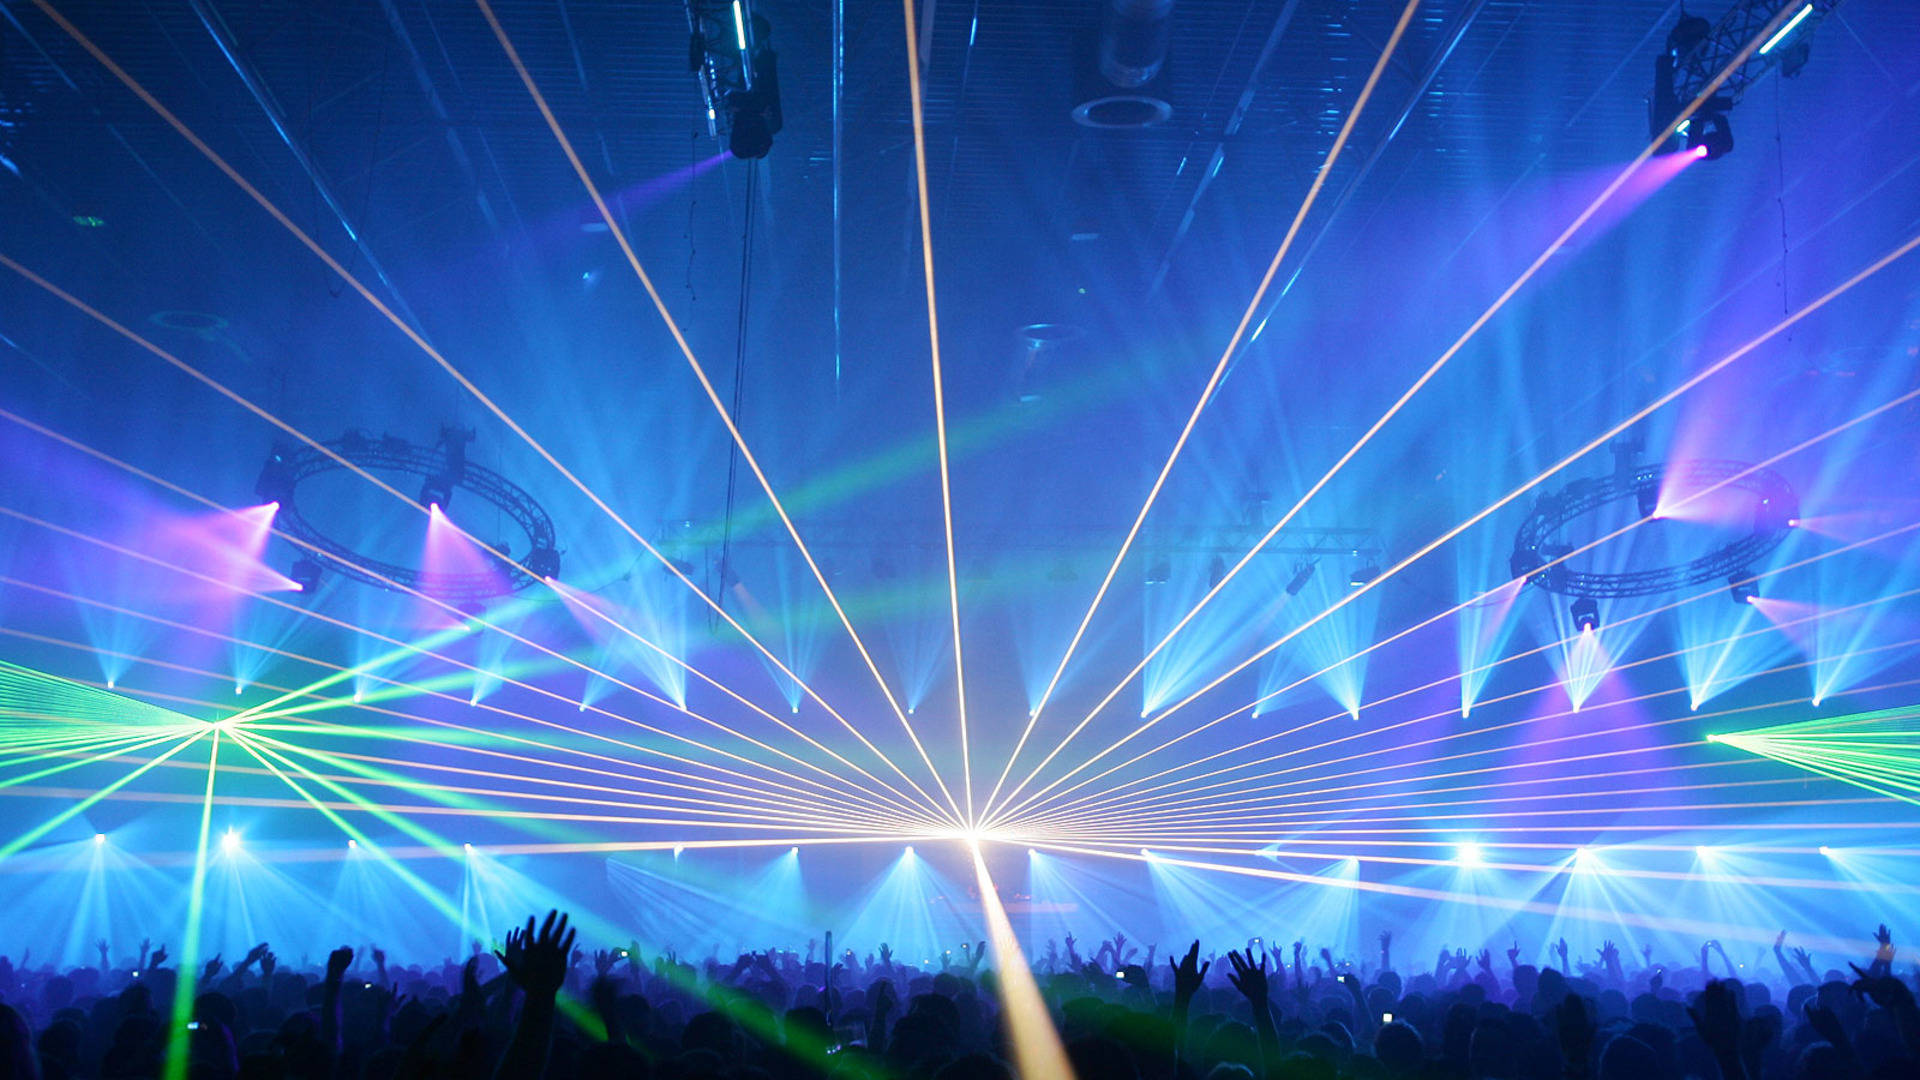 rave» 1080P, 2k, 4k HD wallpapers, backgrounds free download | Rare Gallery